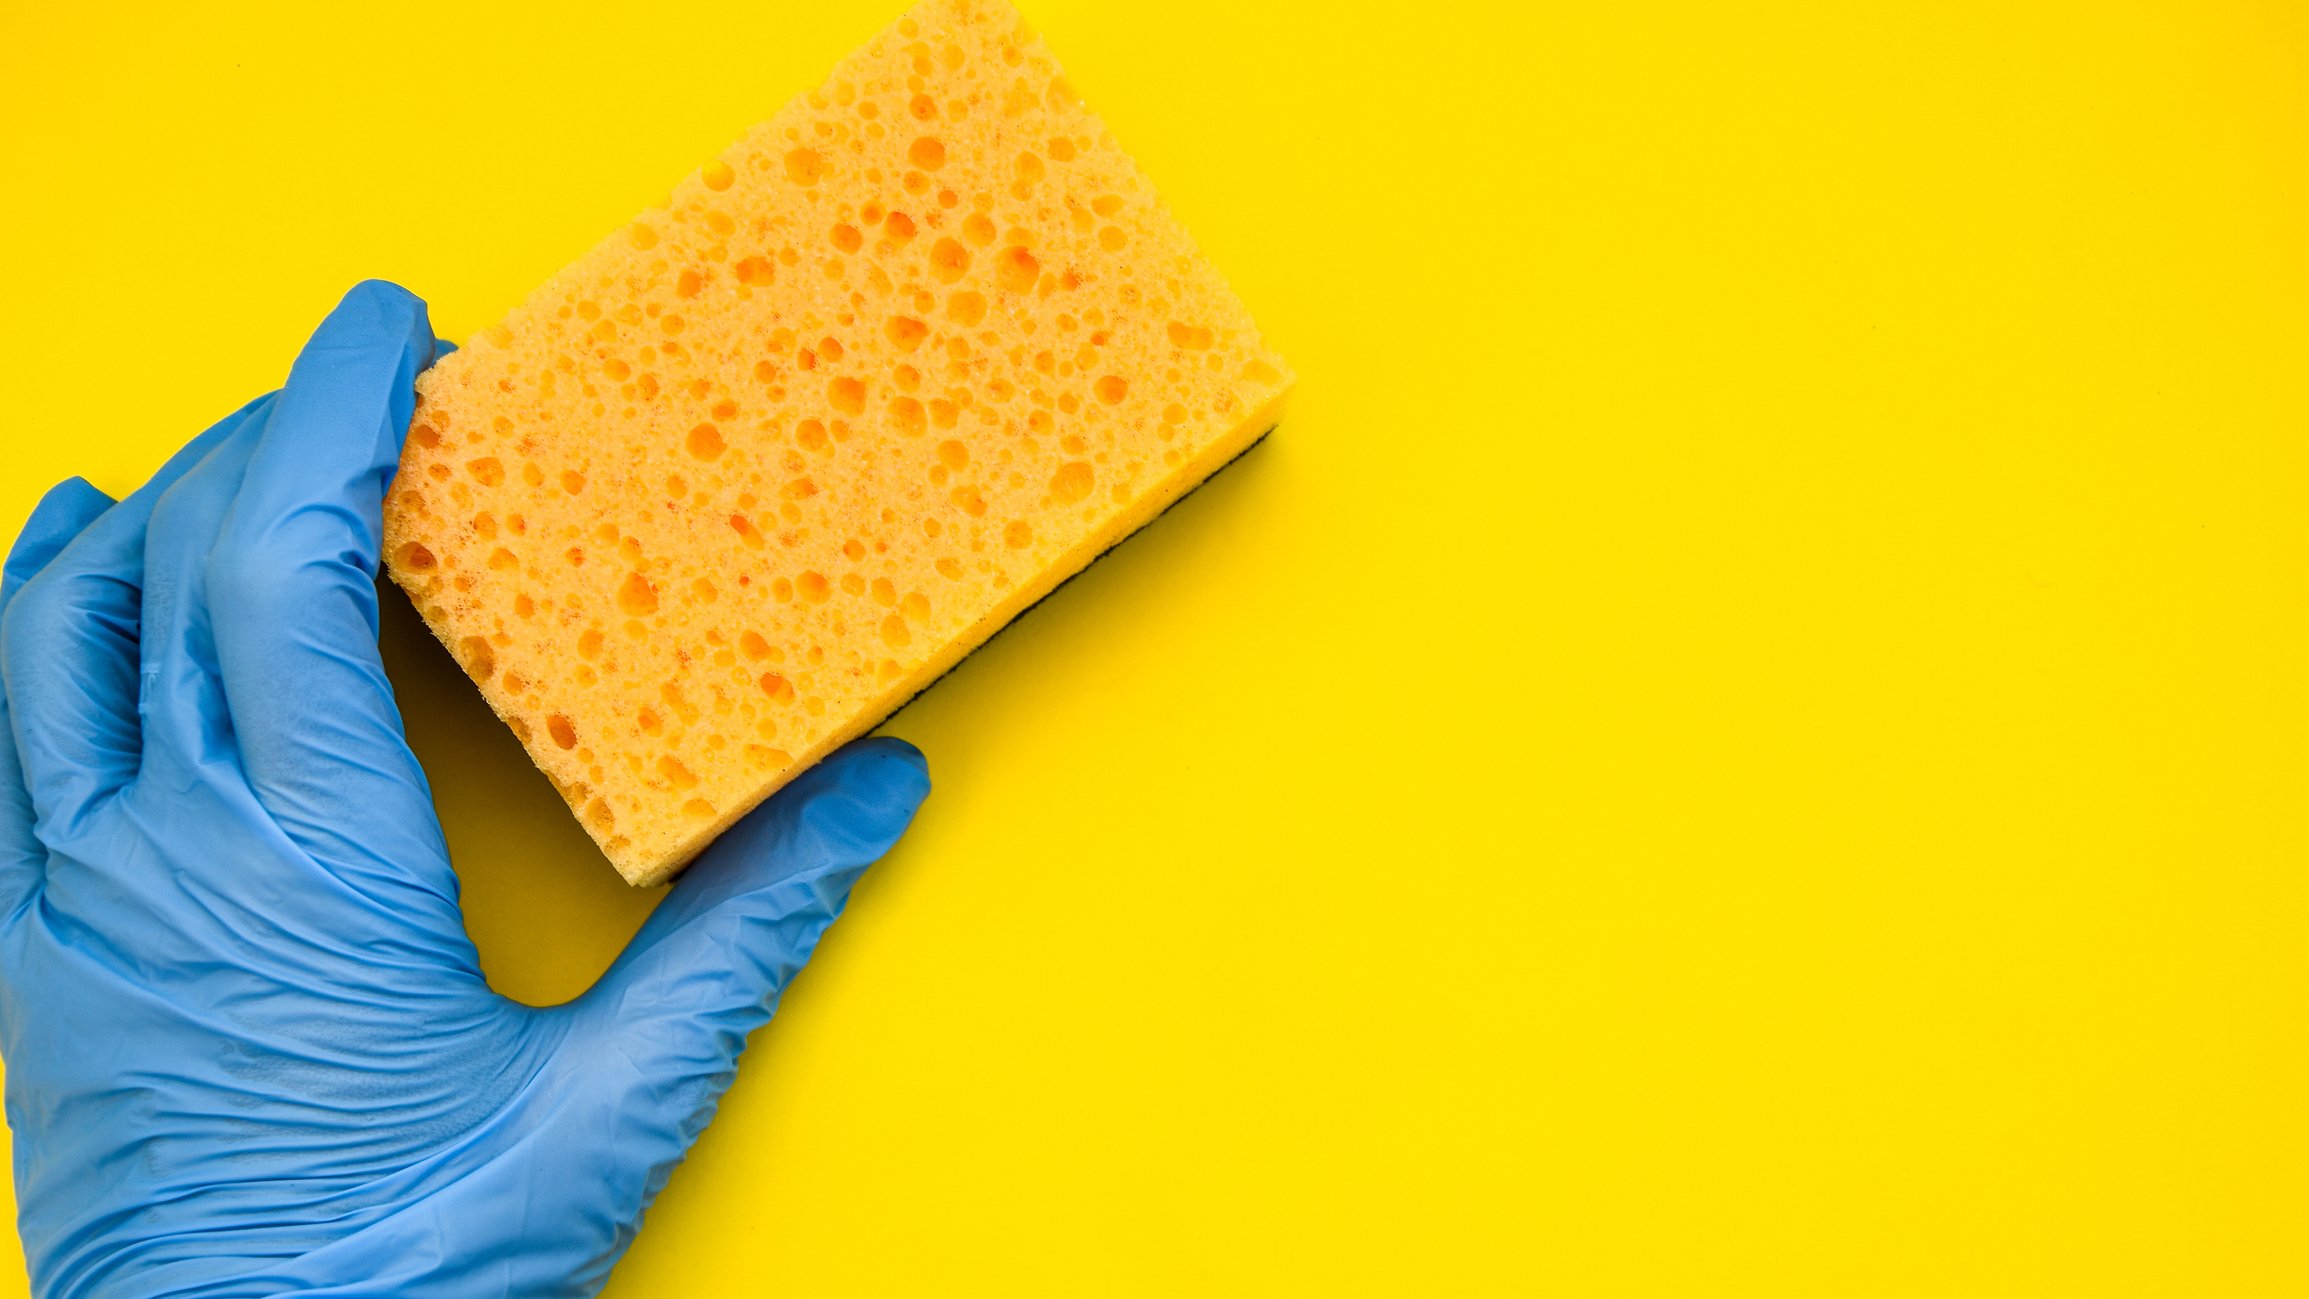 person holding a sponge against a yellow background